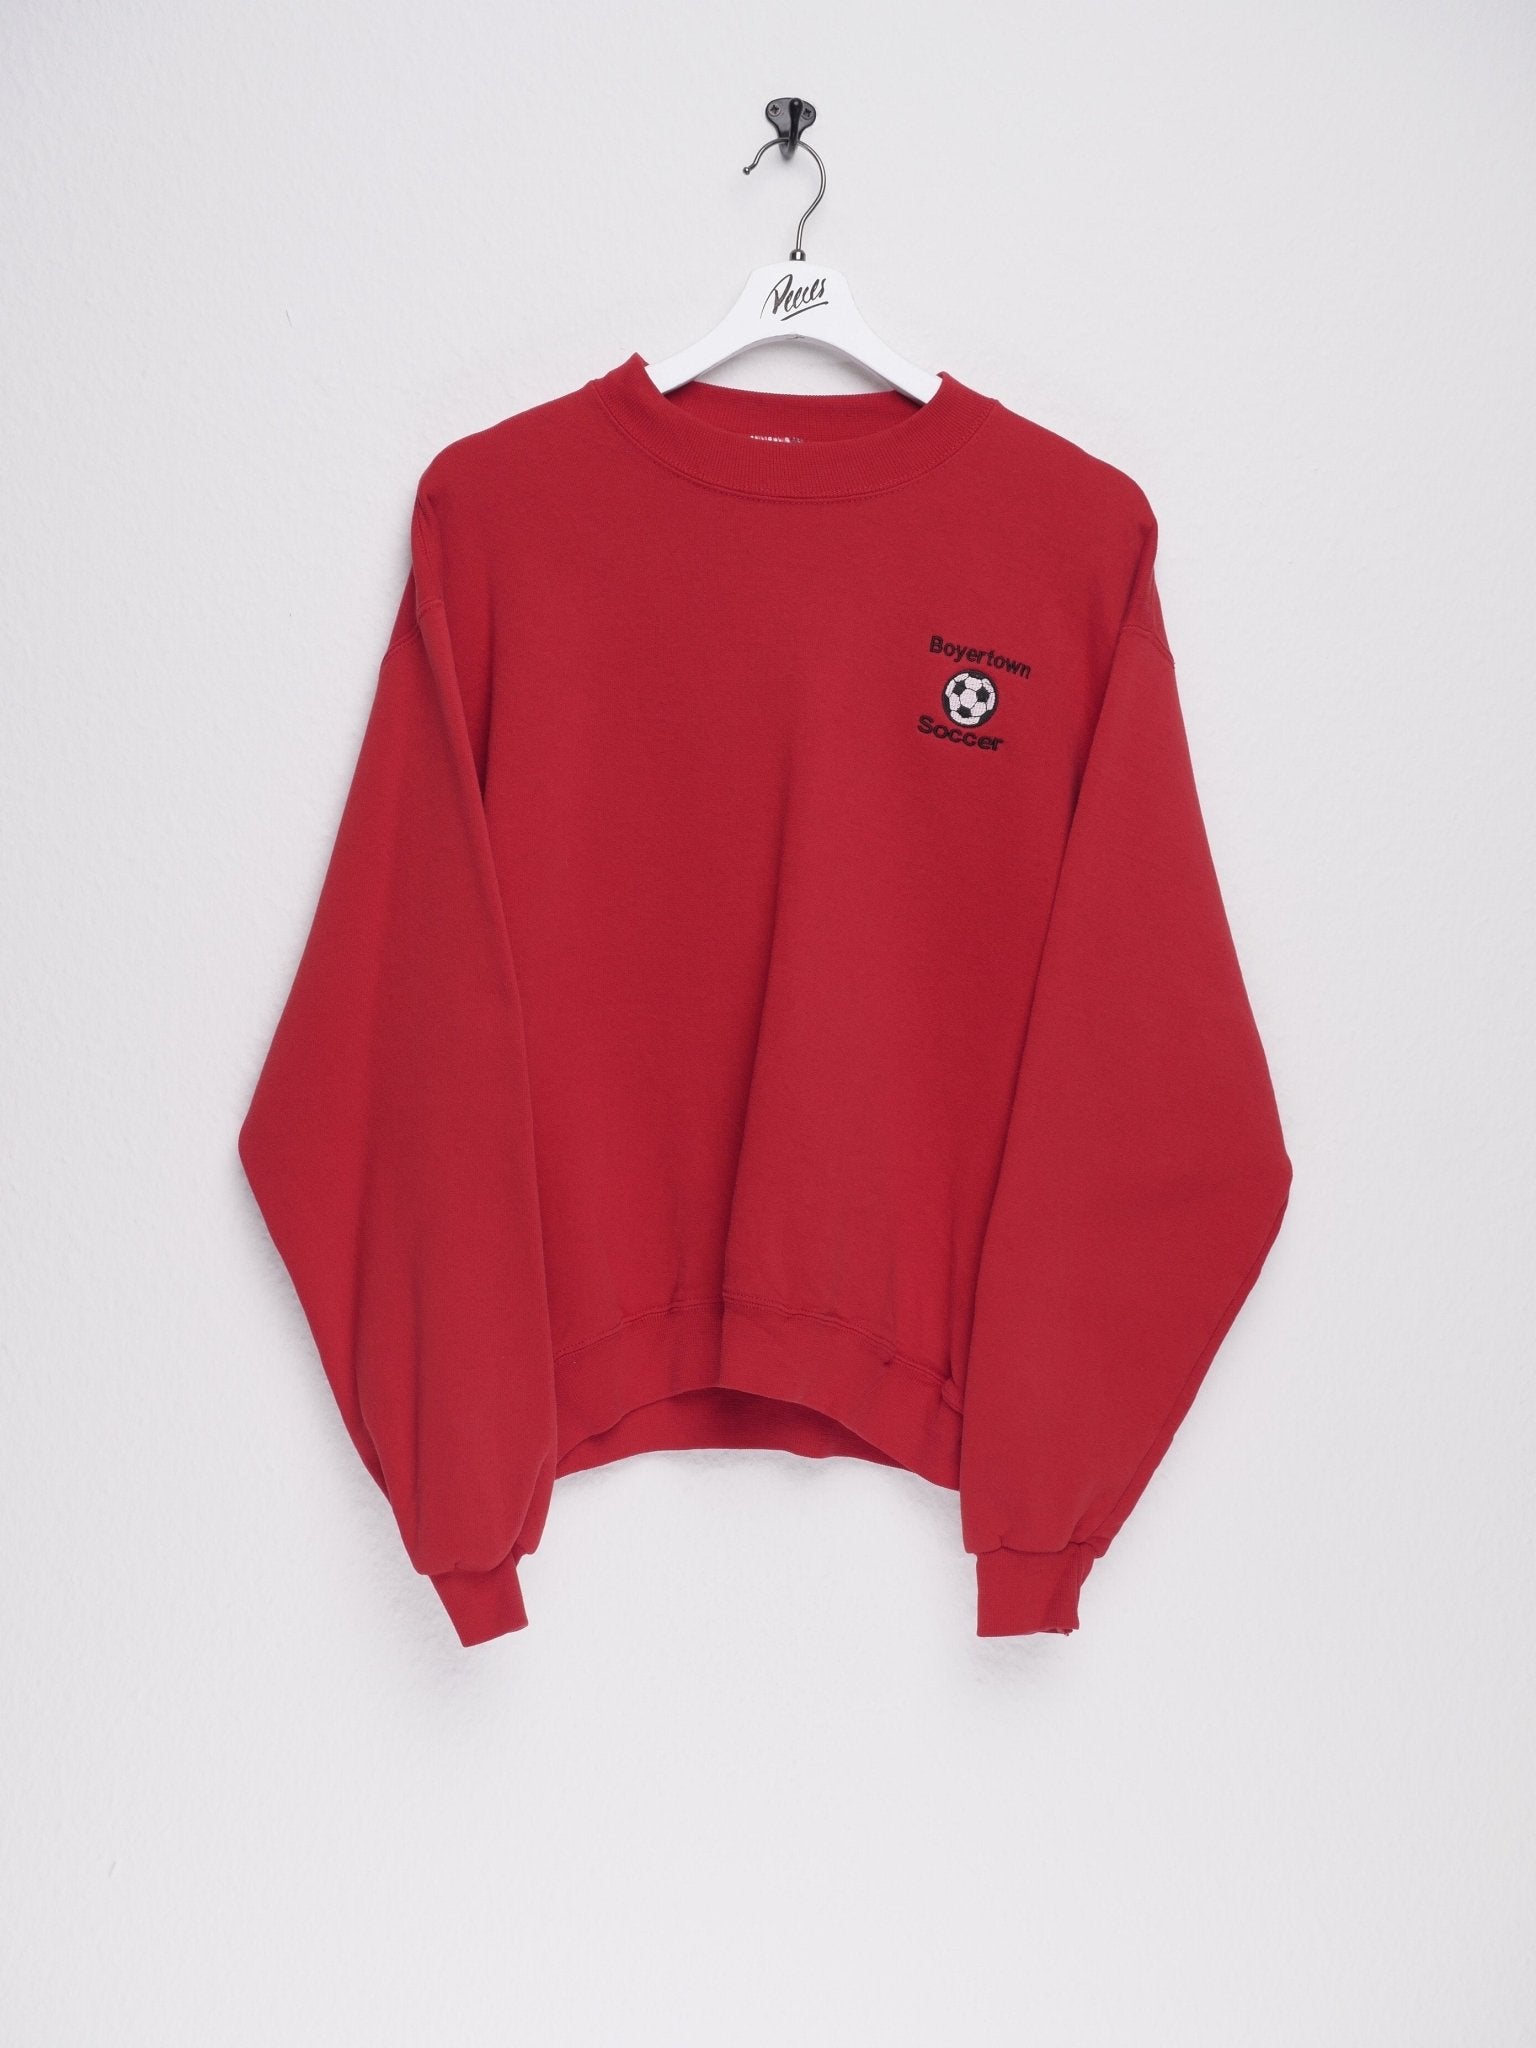 jerzees 'Boyertown Soccer' embroidered Graphic red Sweater - Peeces